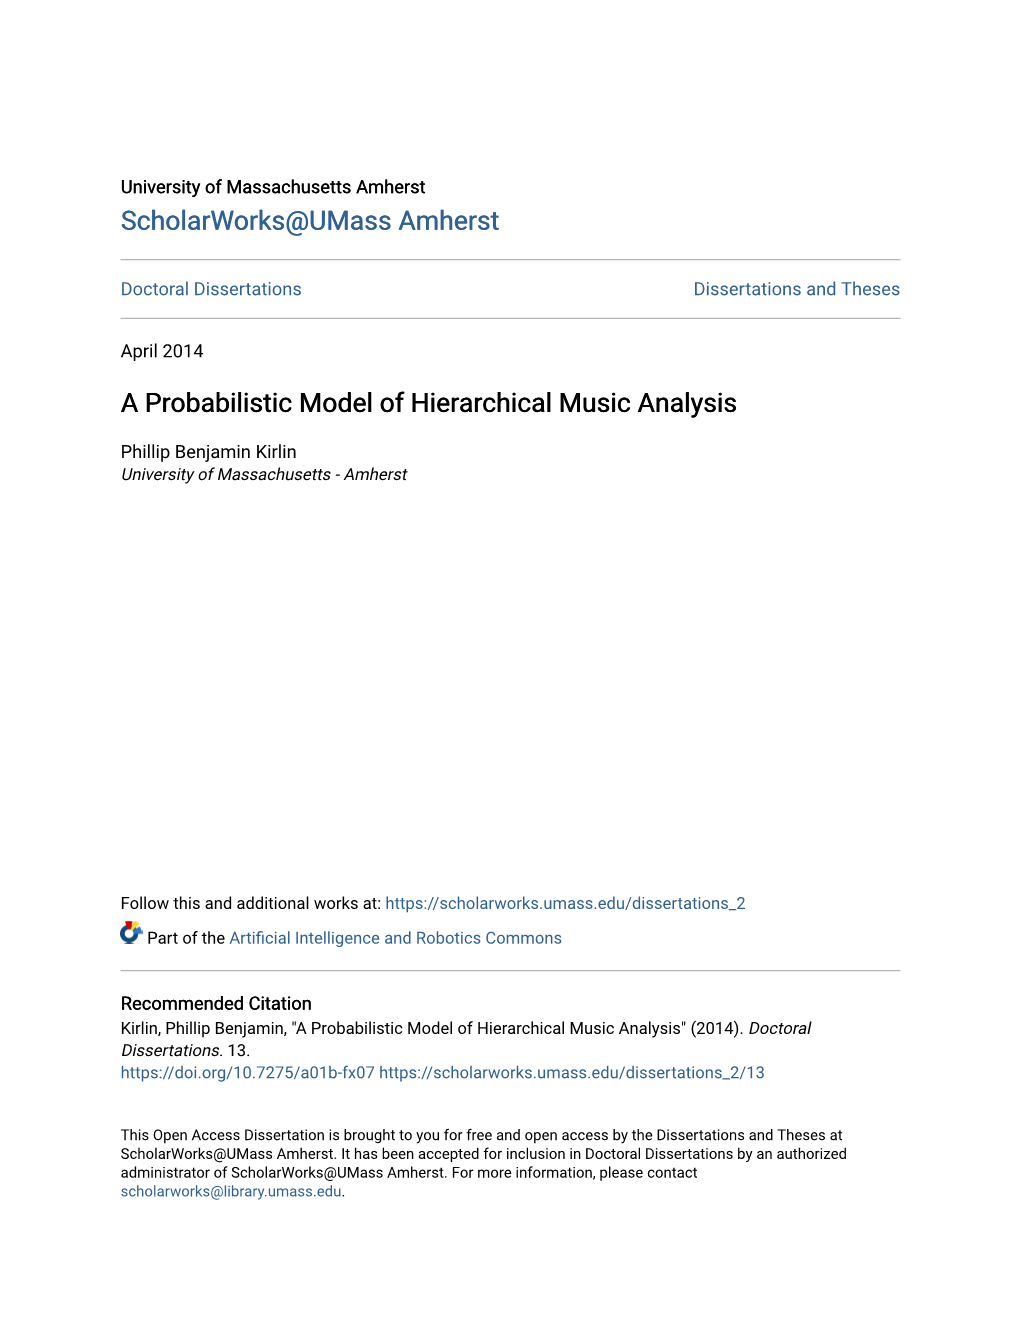 A Probabilistic Model of Hierarchical Music Analysis